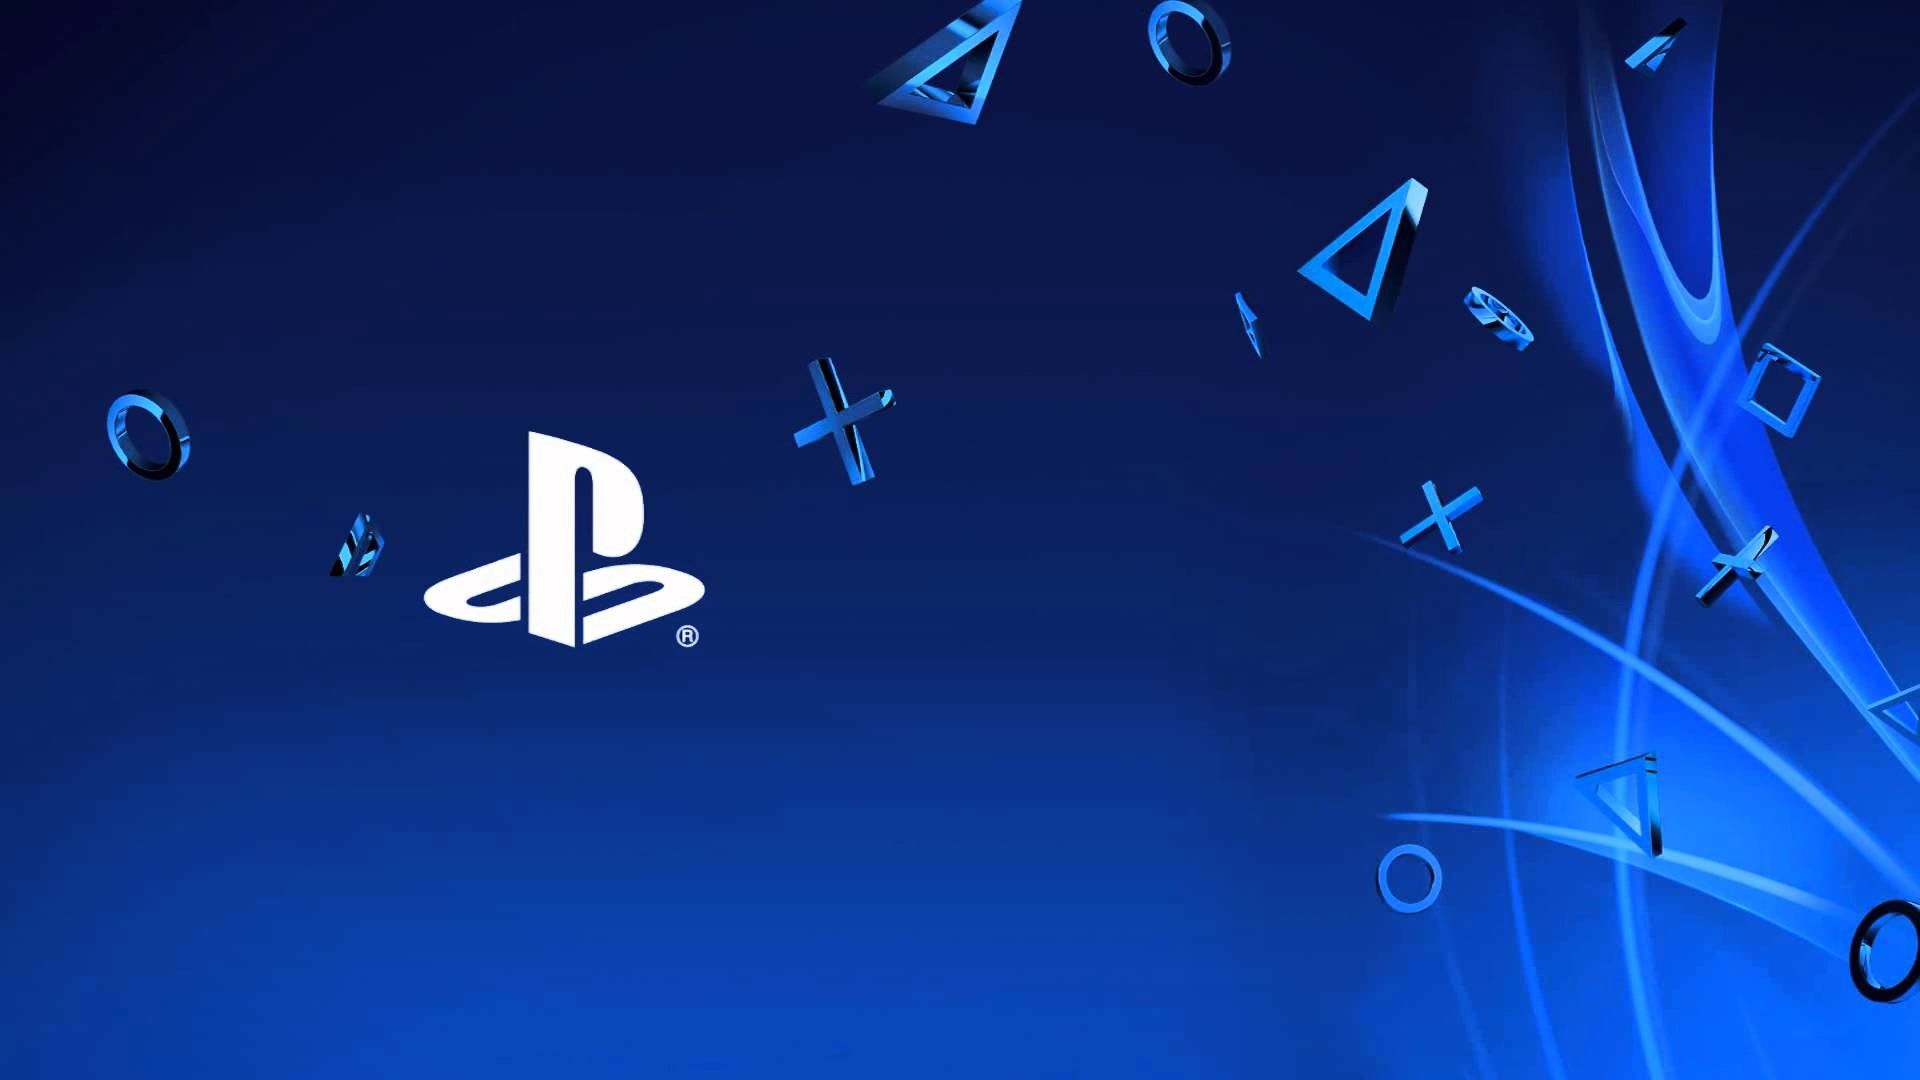 Best PS4 Wallpapers on WallpaperDog